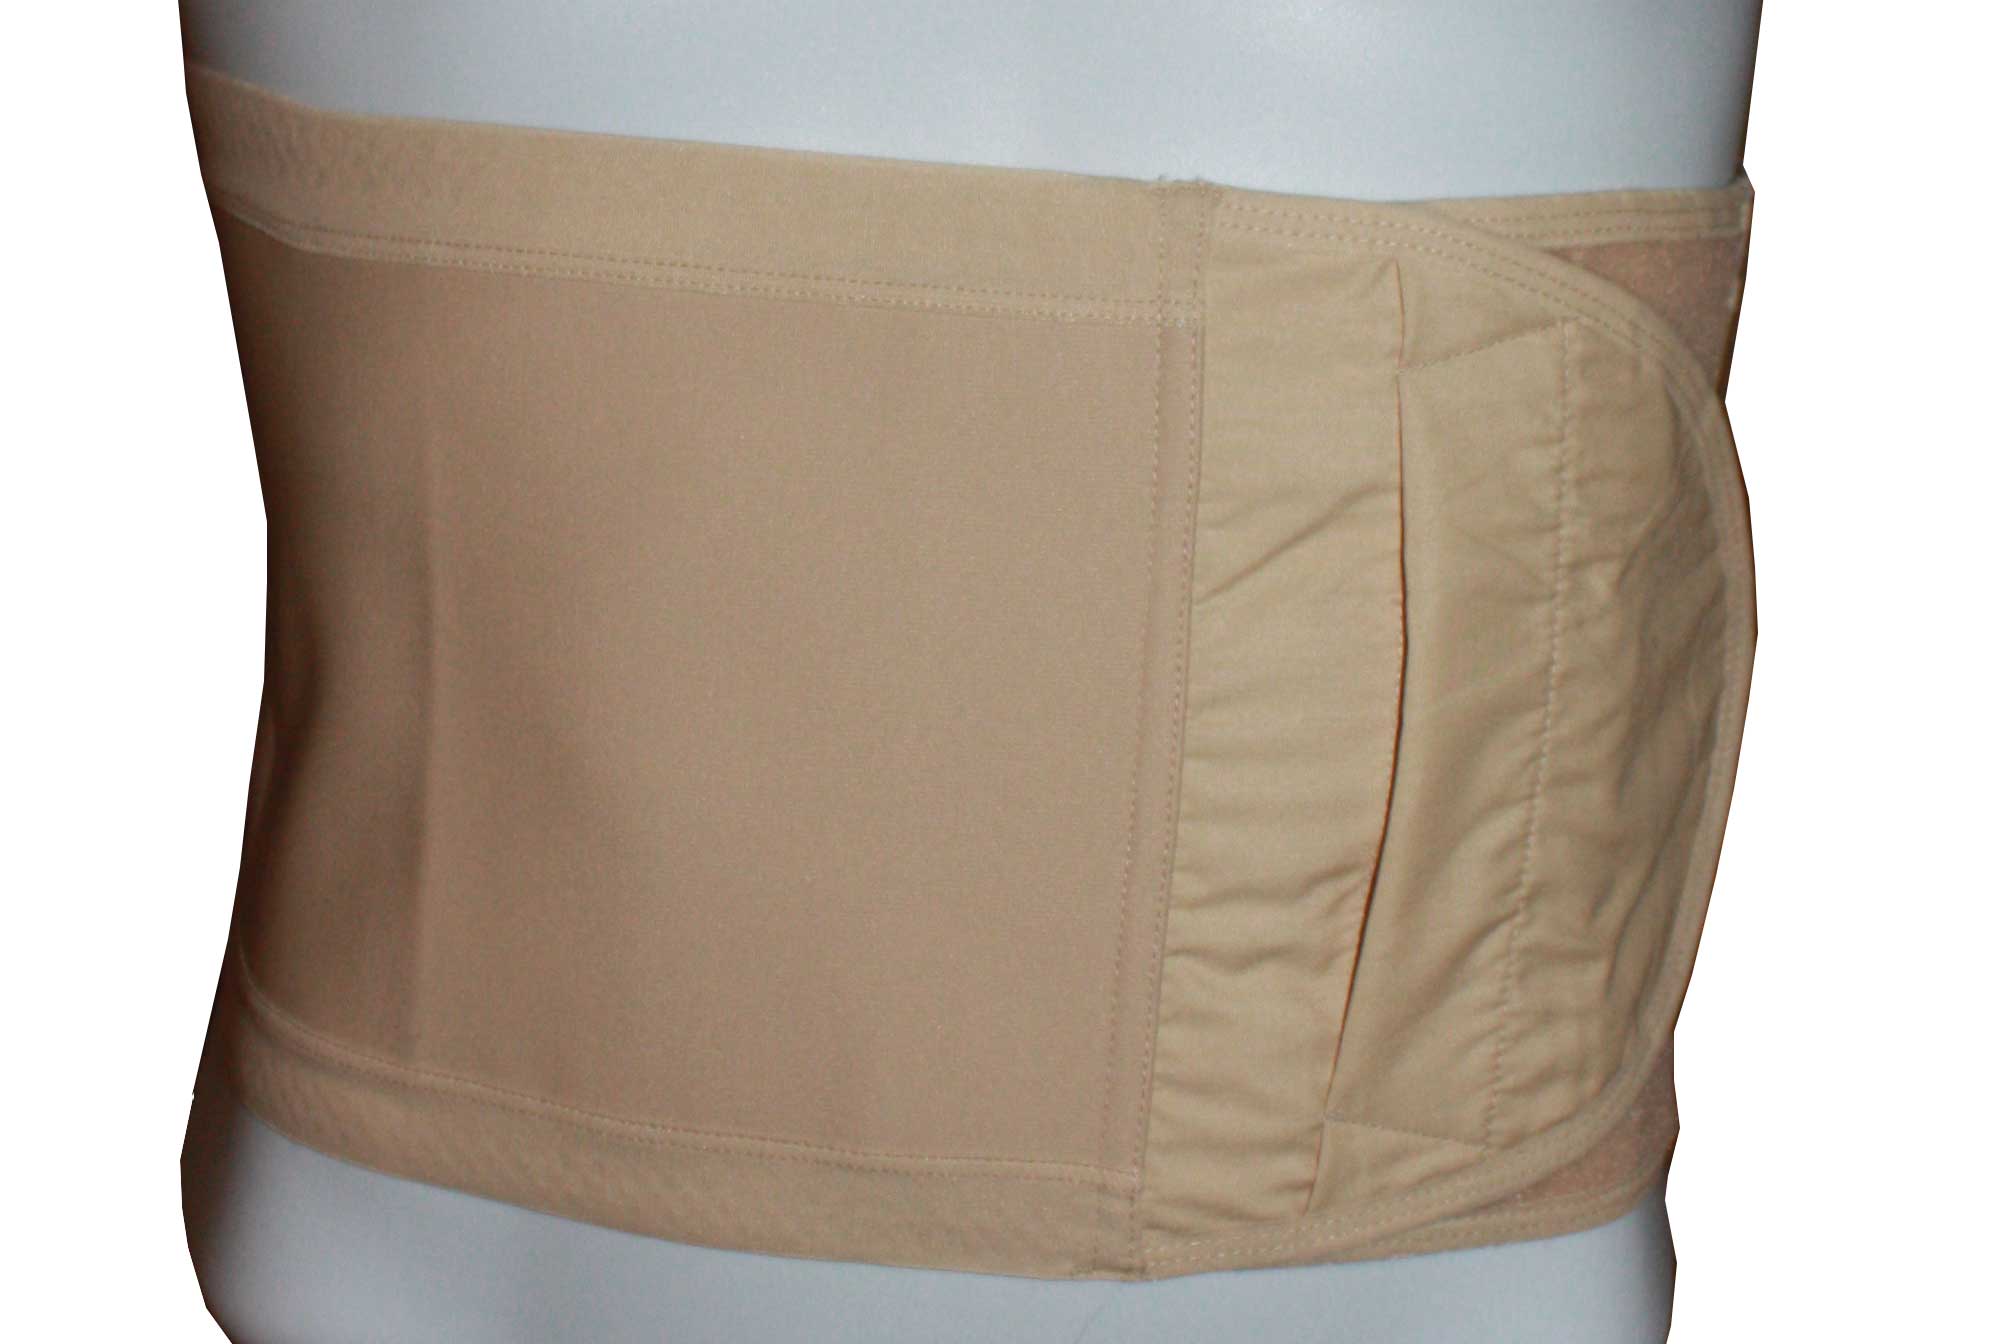 Buy Safe n' Simple Security Ostomy Belt with Pouch Opening at Medical Monks!